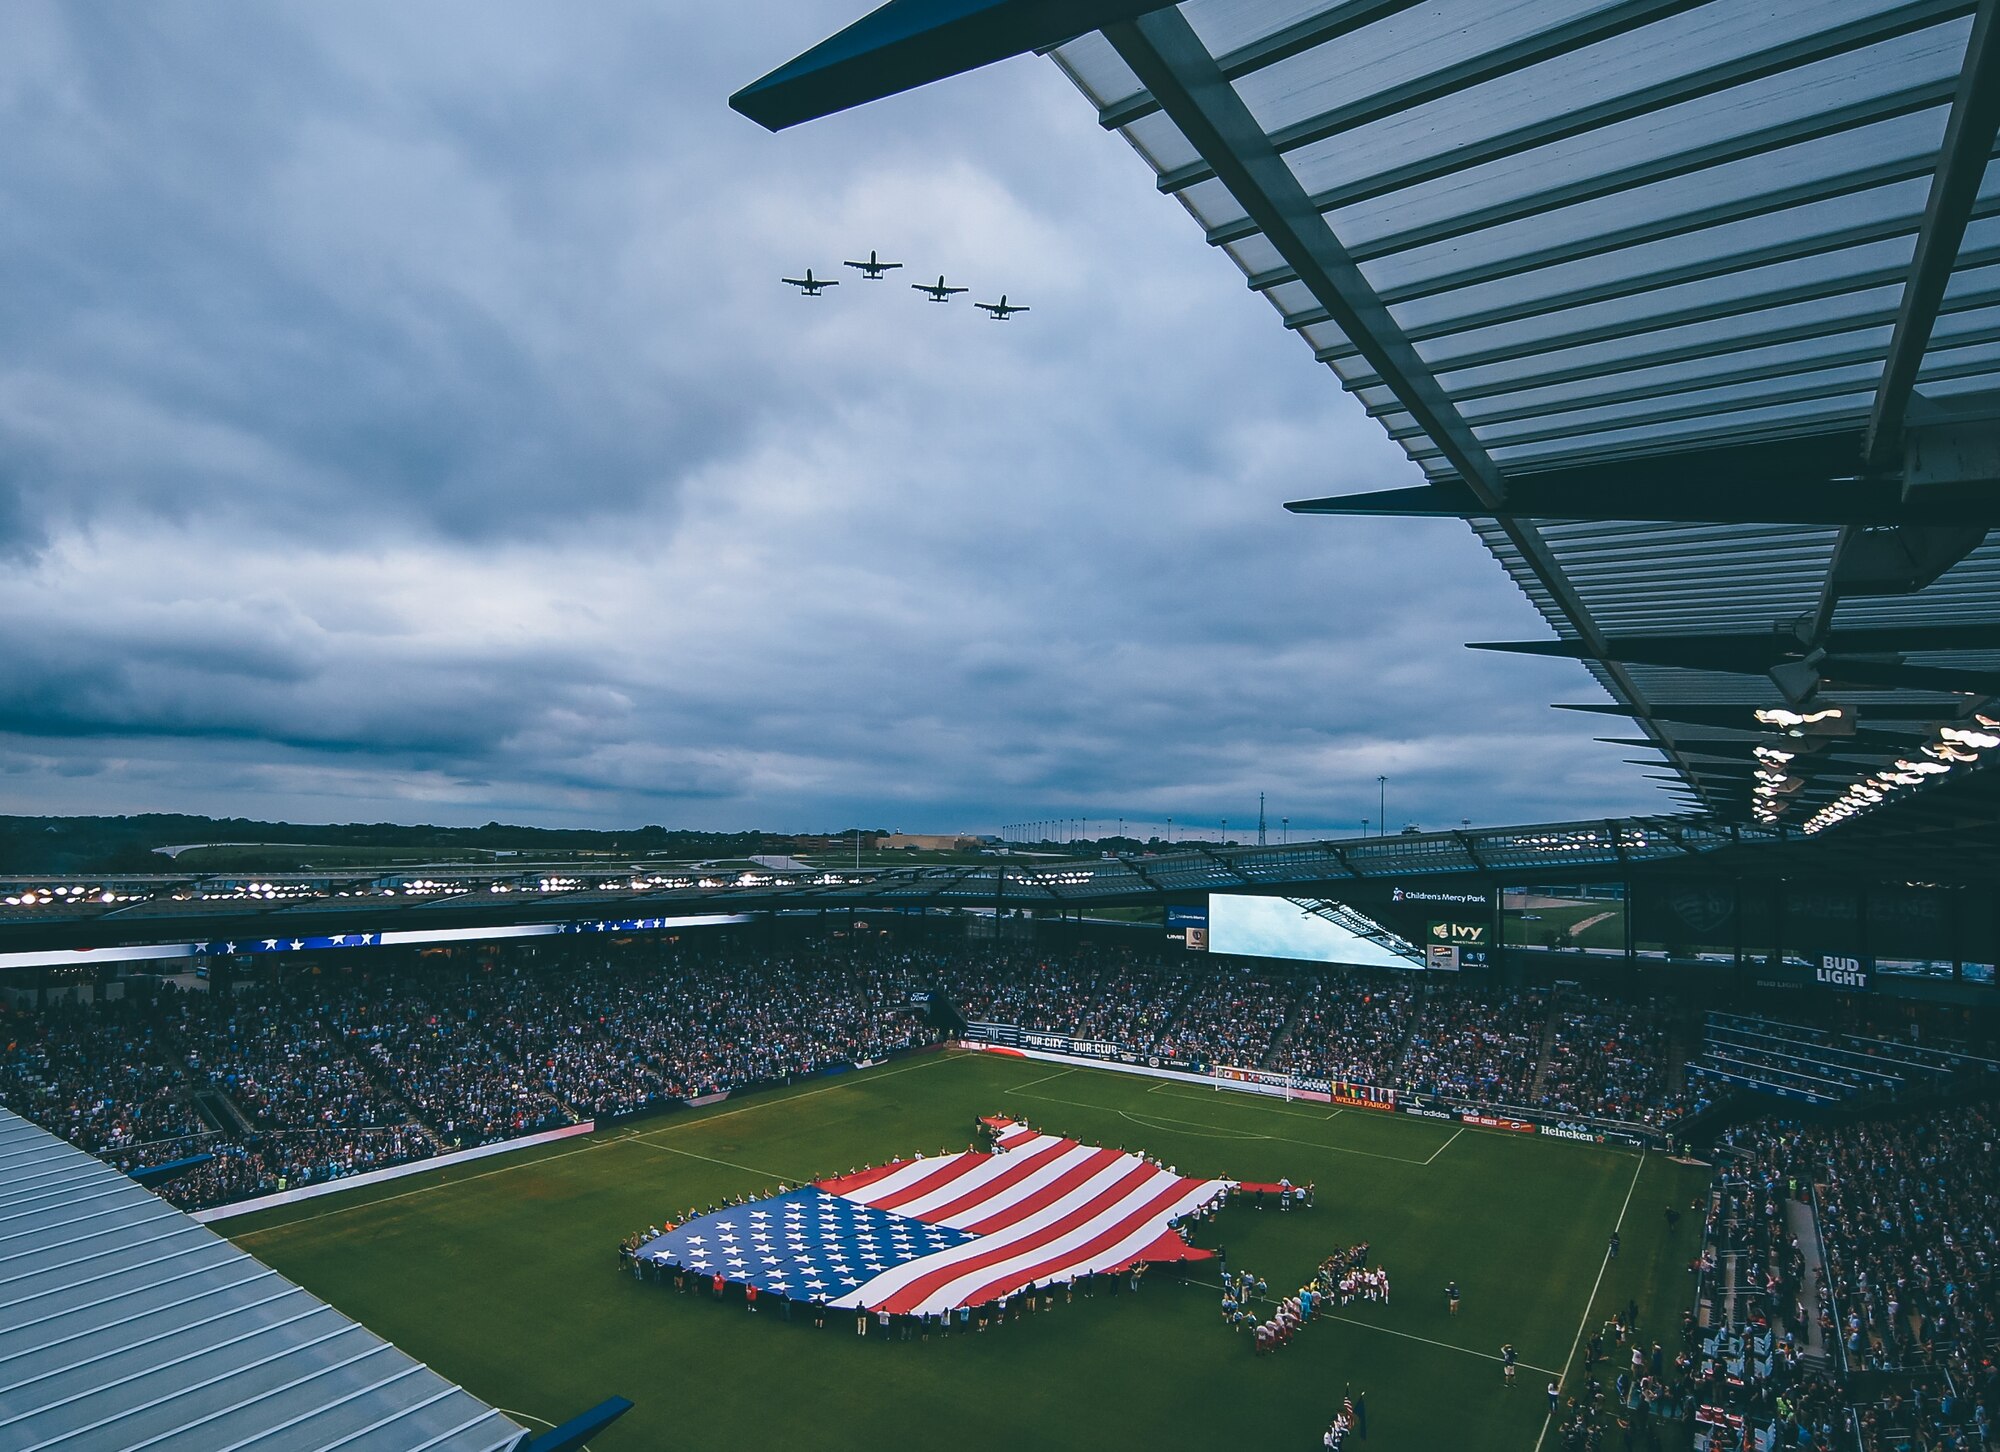 Four A-10 Thunderbolt II attack aircraft fly over Children's Mercy Park as a flag is unfurled on the field below in August 2017.